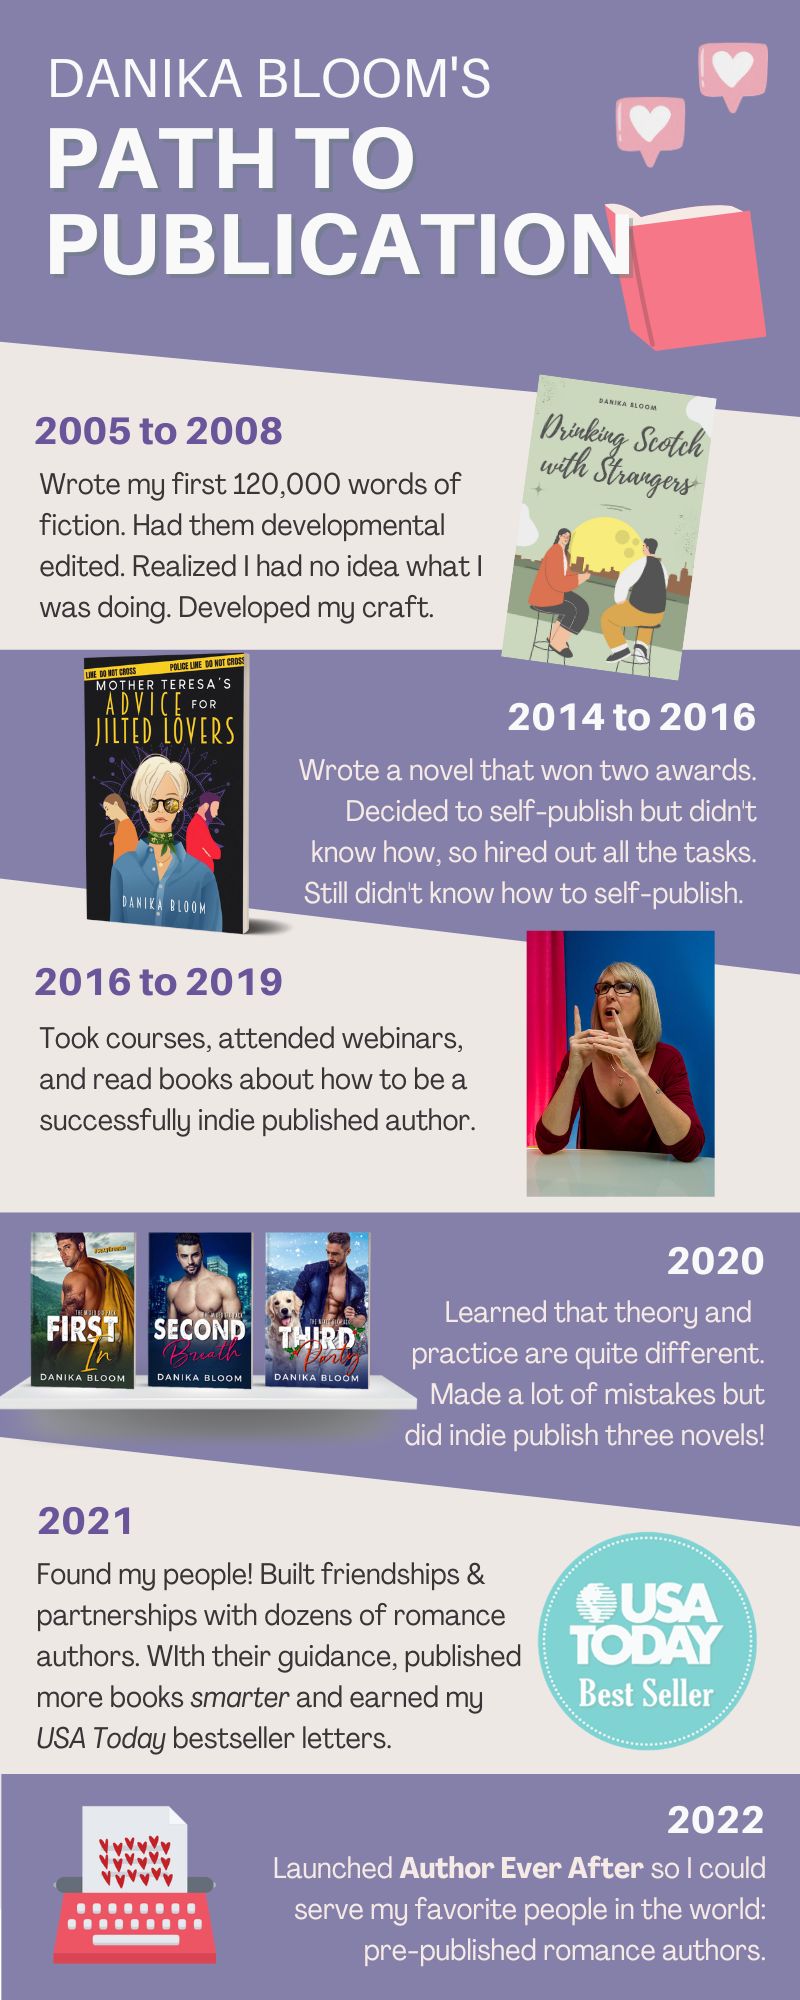 Danika Bloom's path to publication infographic